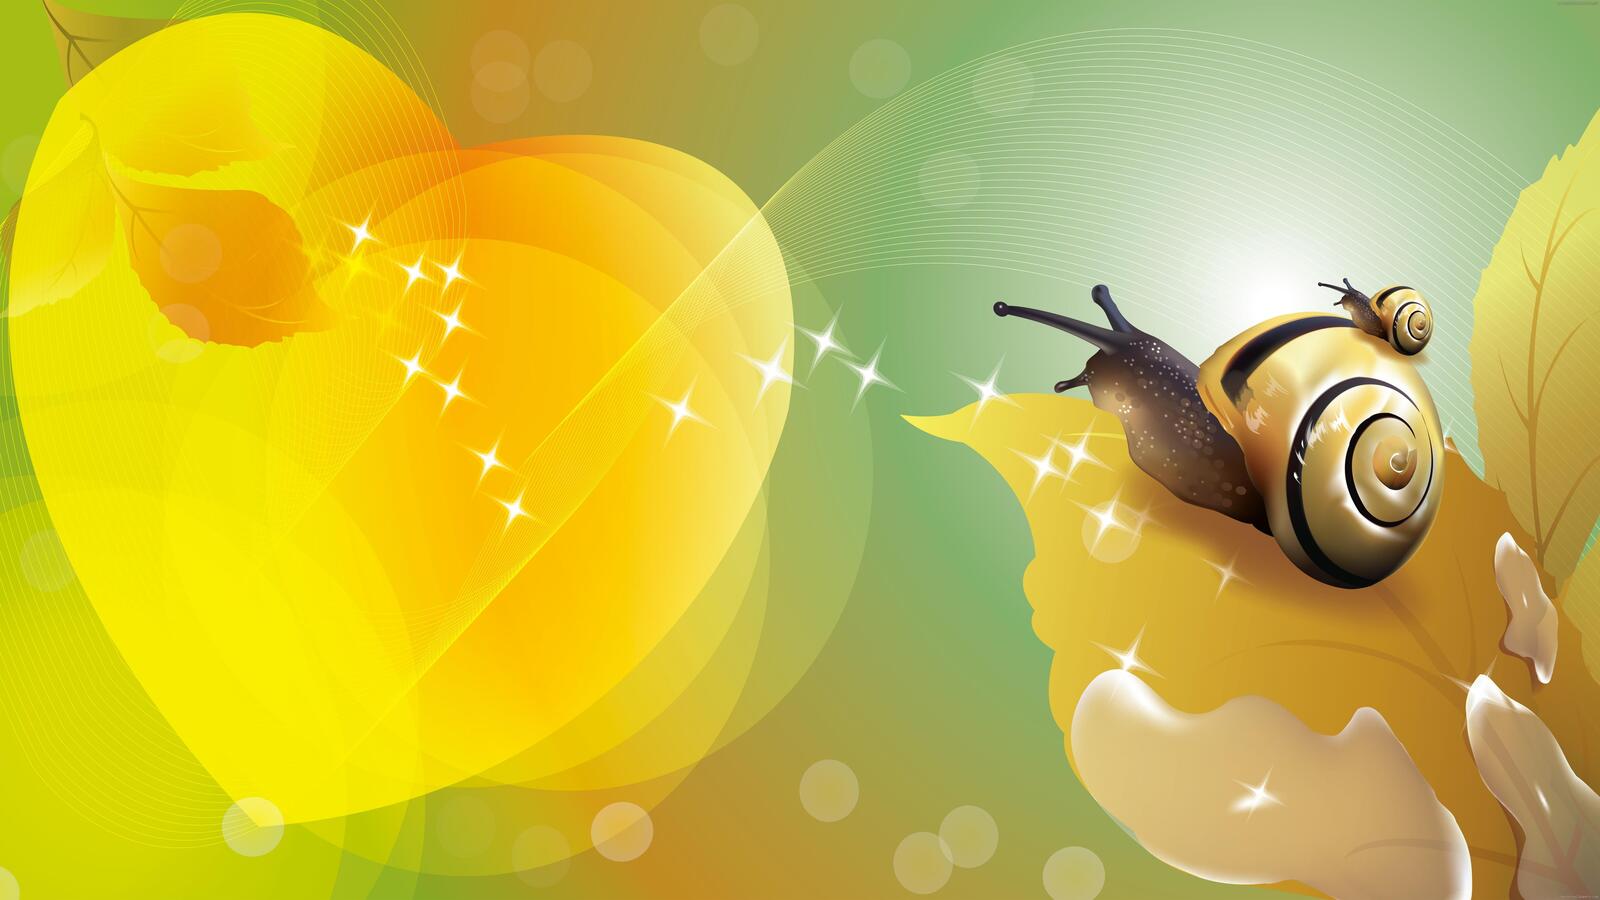 Wallpapers illustration snail insect on the desktop